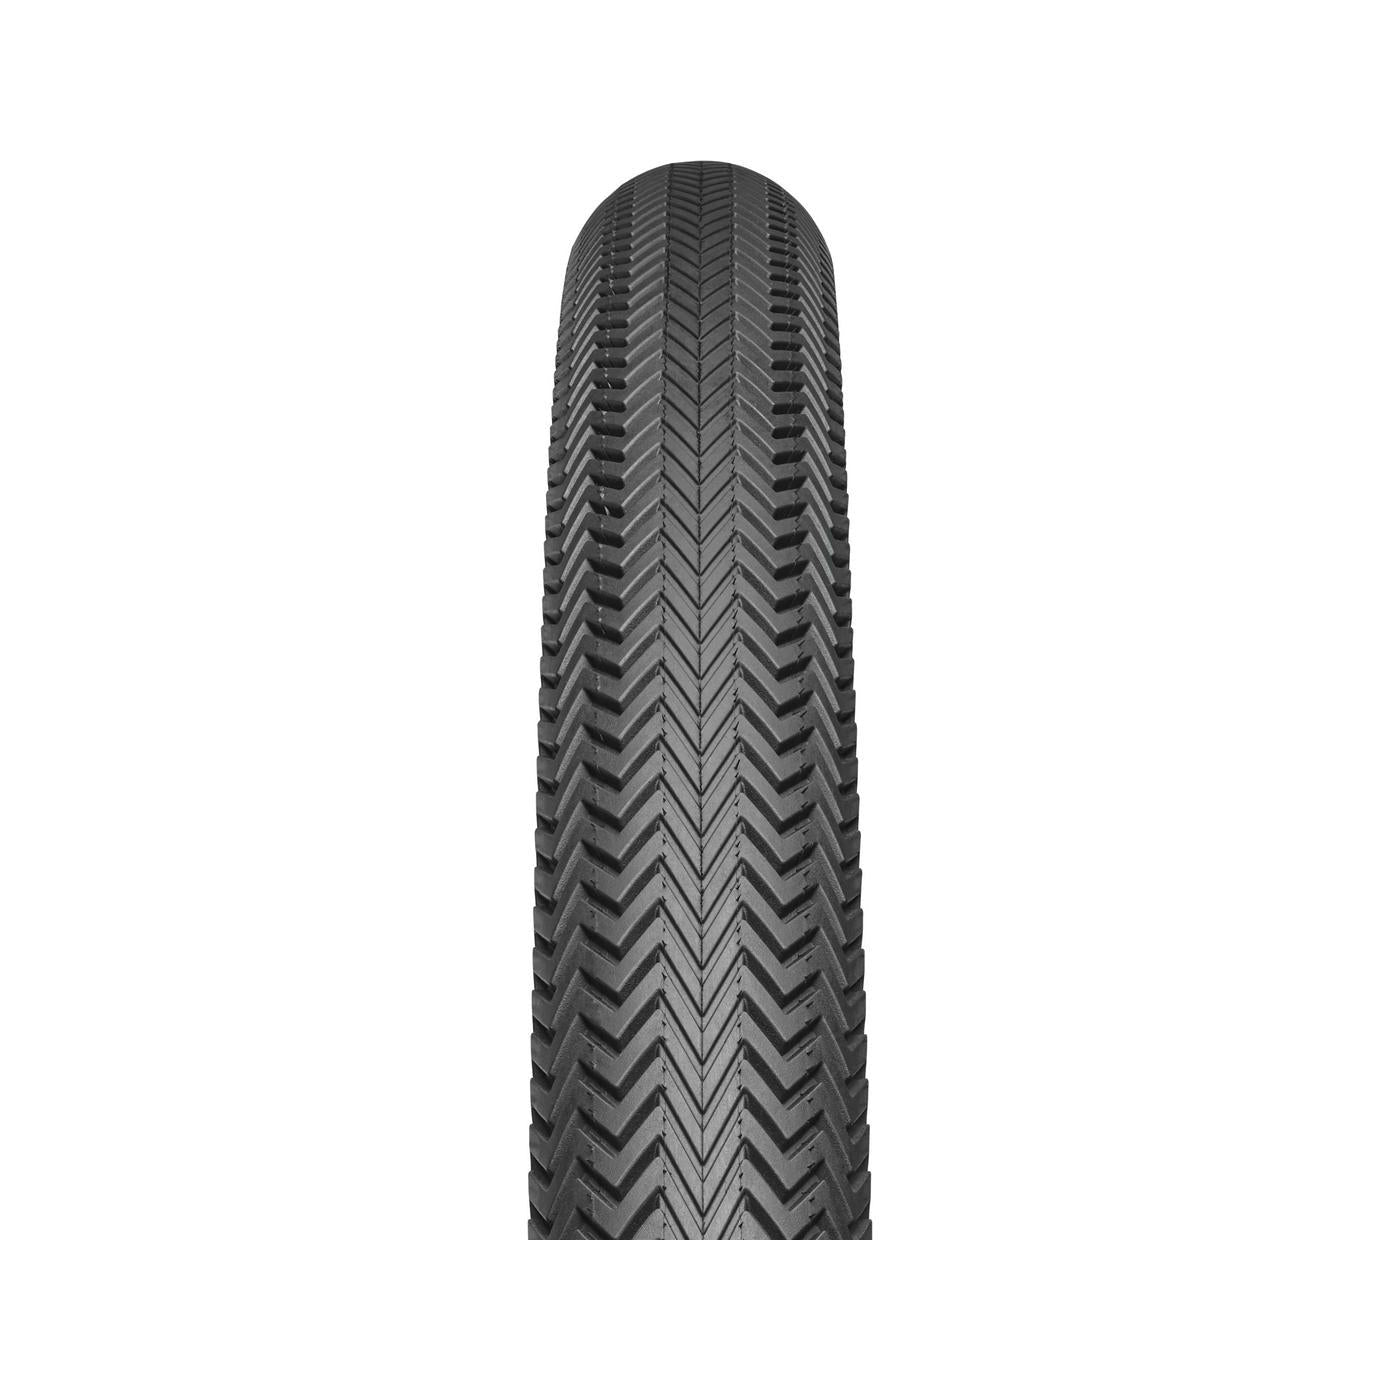 Specialized Sawtooth 2Bliss Ready 700c Bike Tire - Tires - Bicycle Warehouse